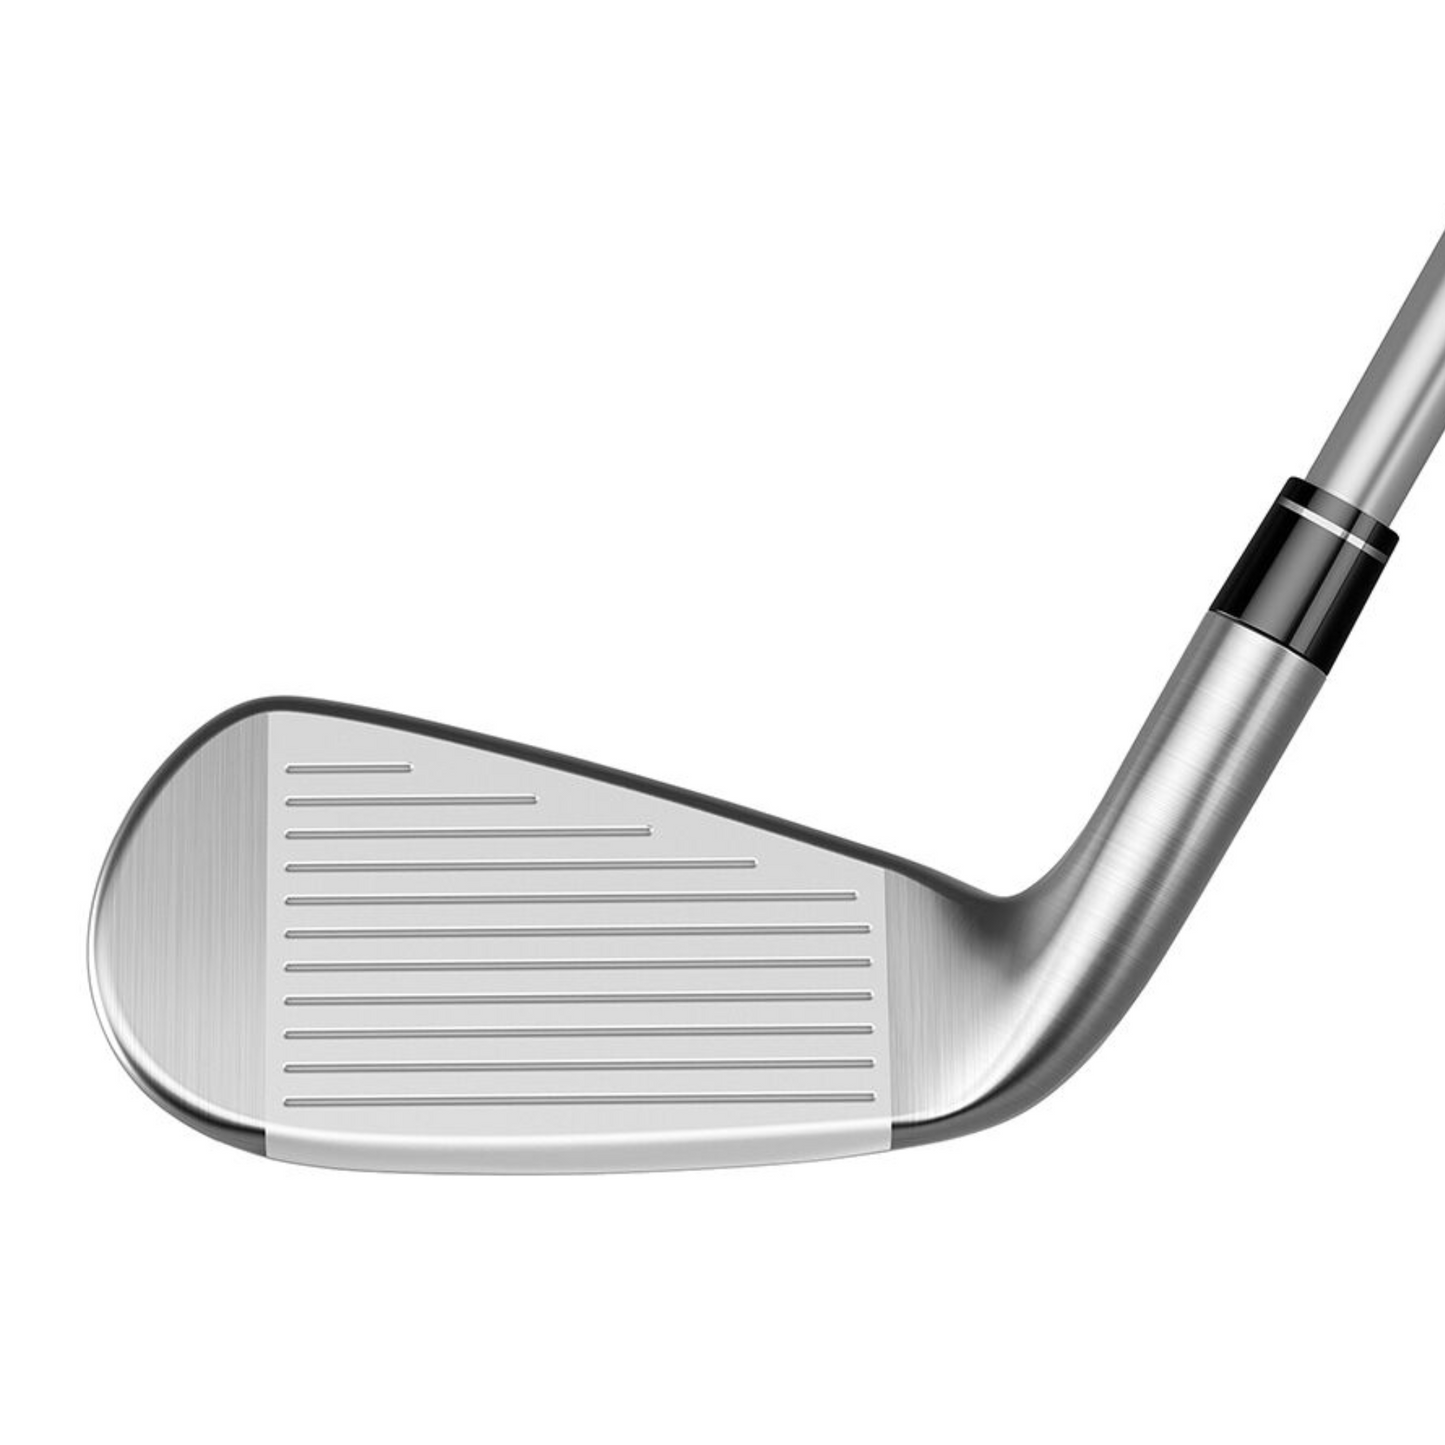 TaylorMade Golf Stealth DHY Driving Iron   